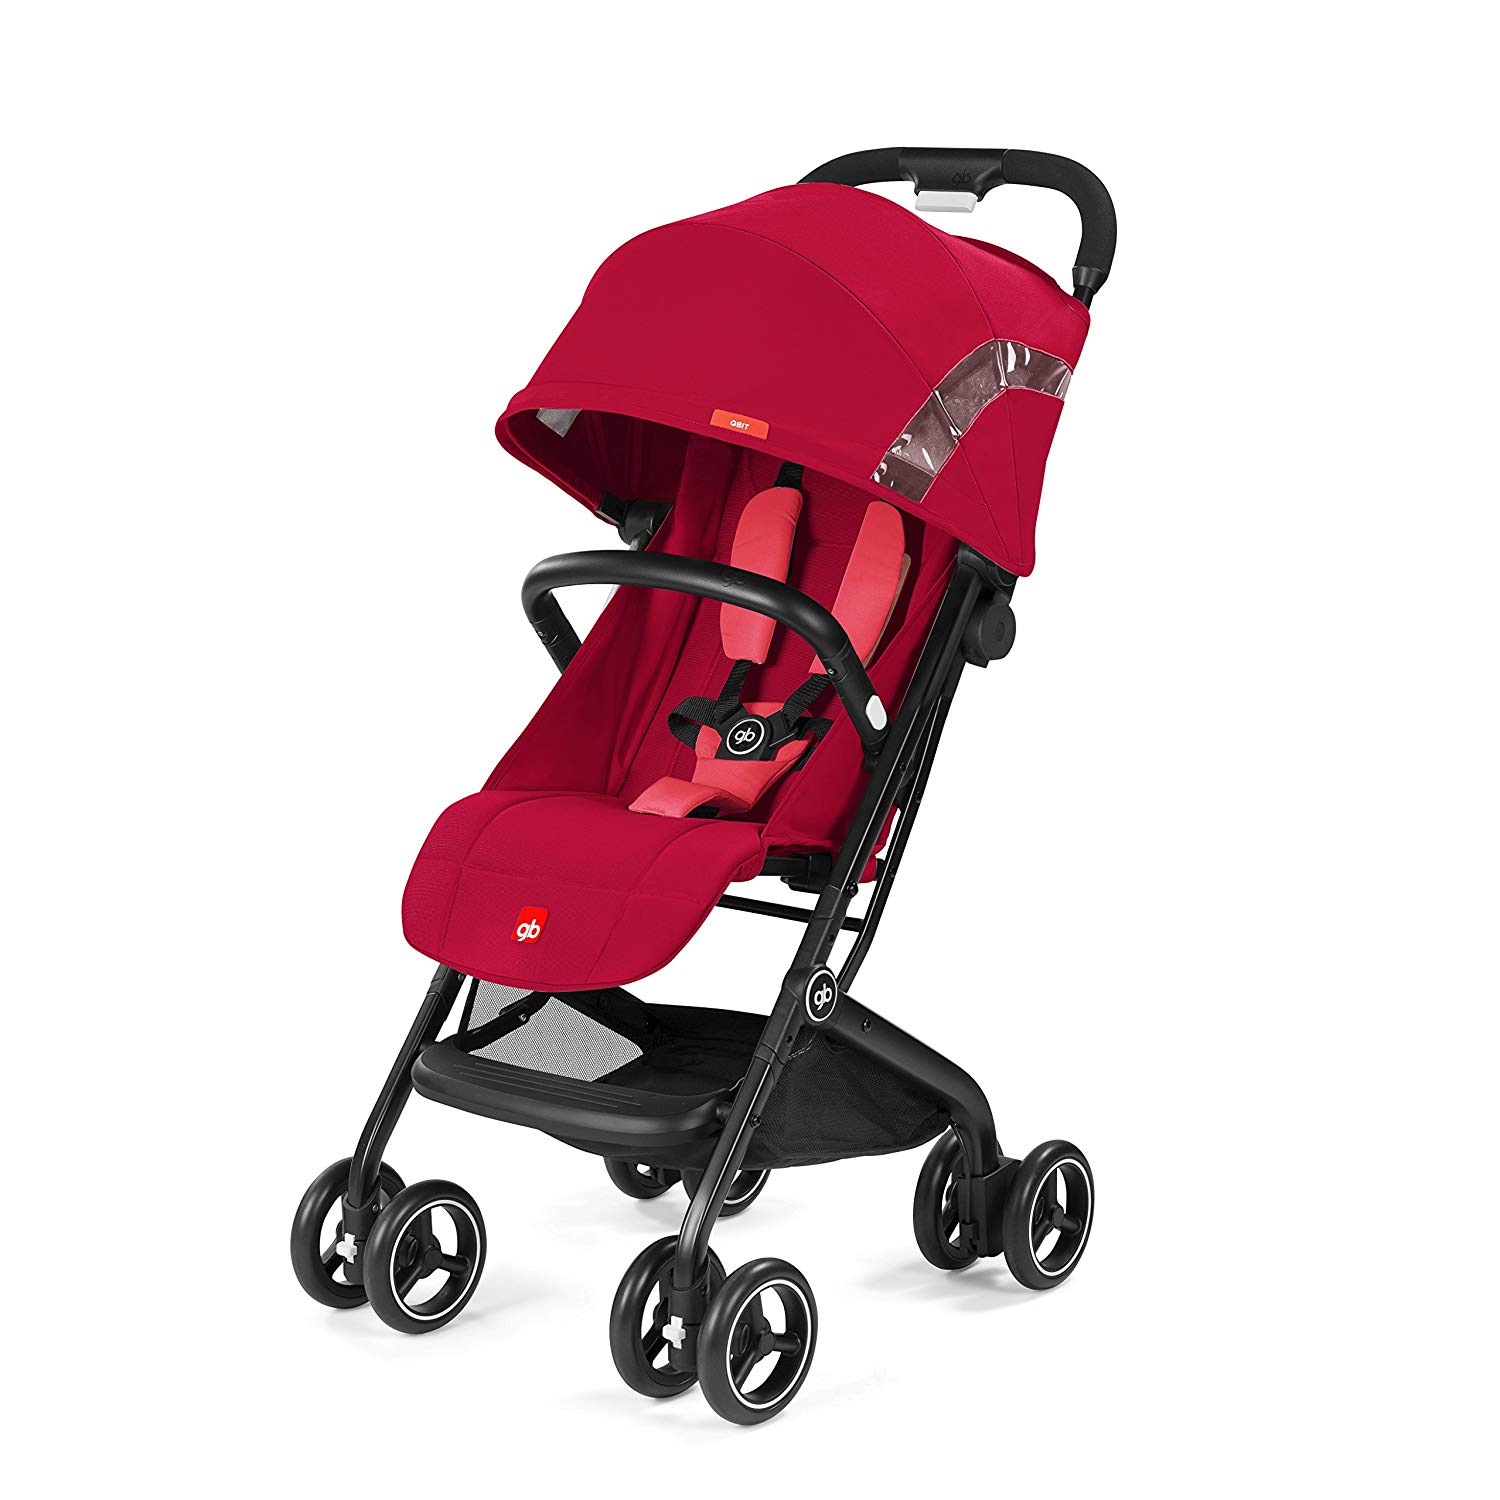 GB Gold Qbit Buggies Collection 2018 Cherry red